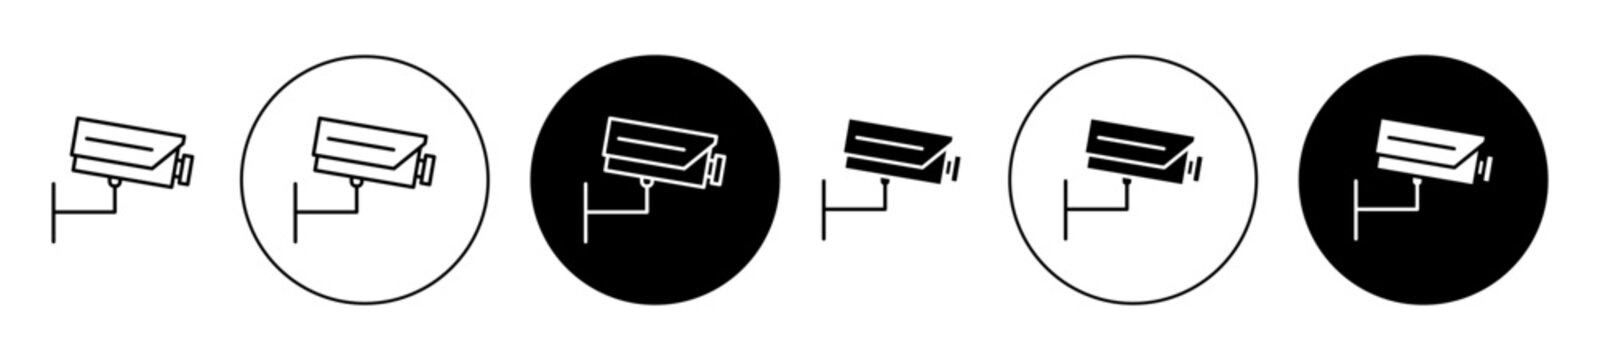 Security camera icon set in black filled and outlined style. suitable for UI designs